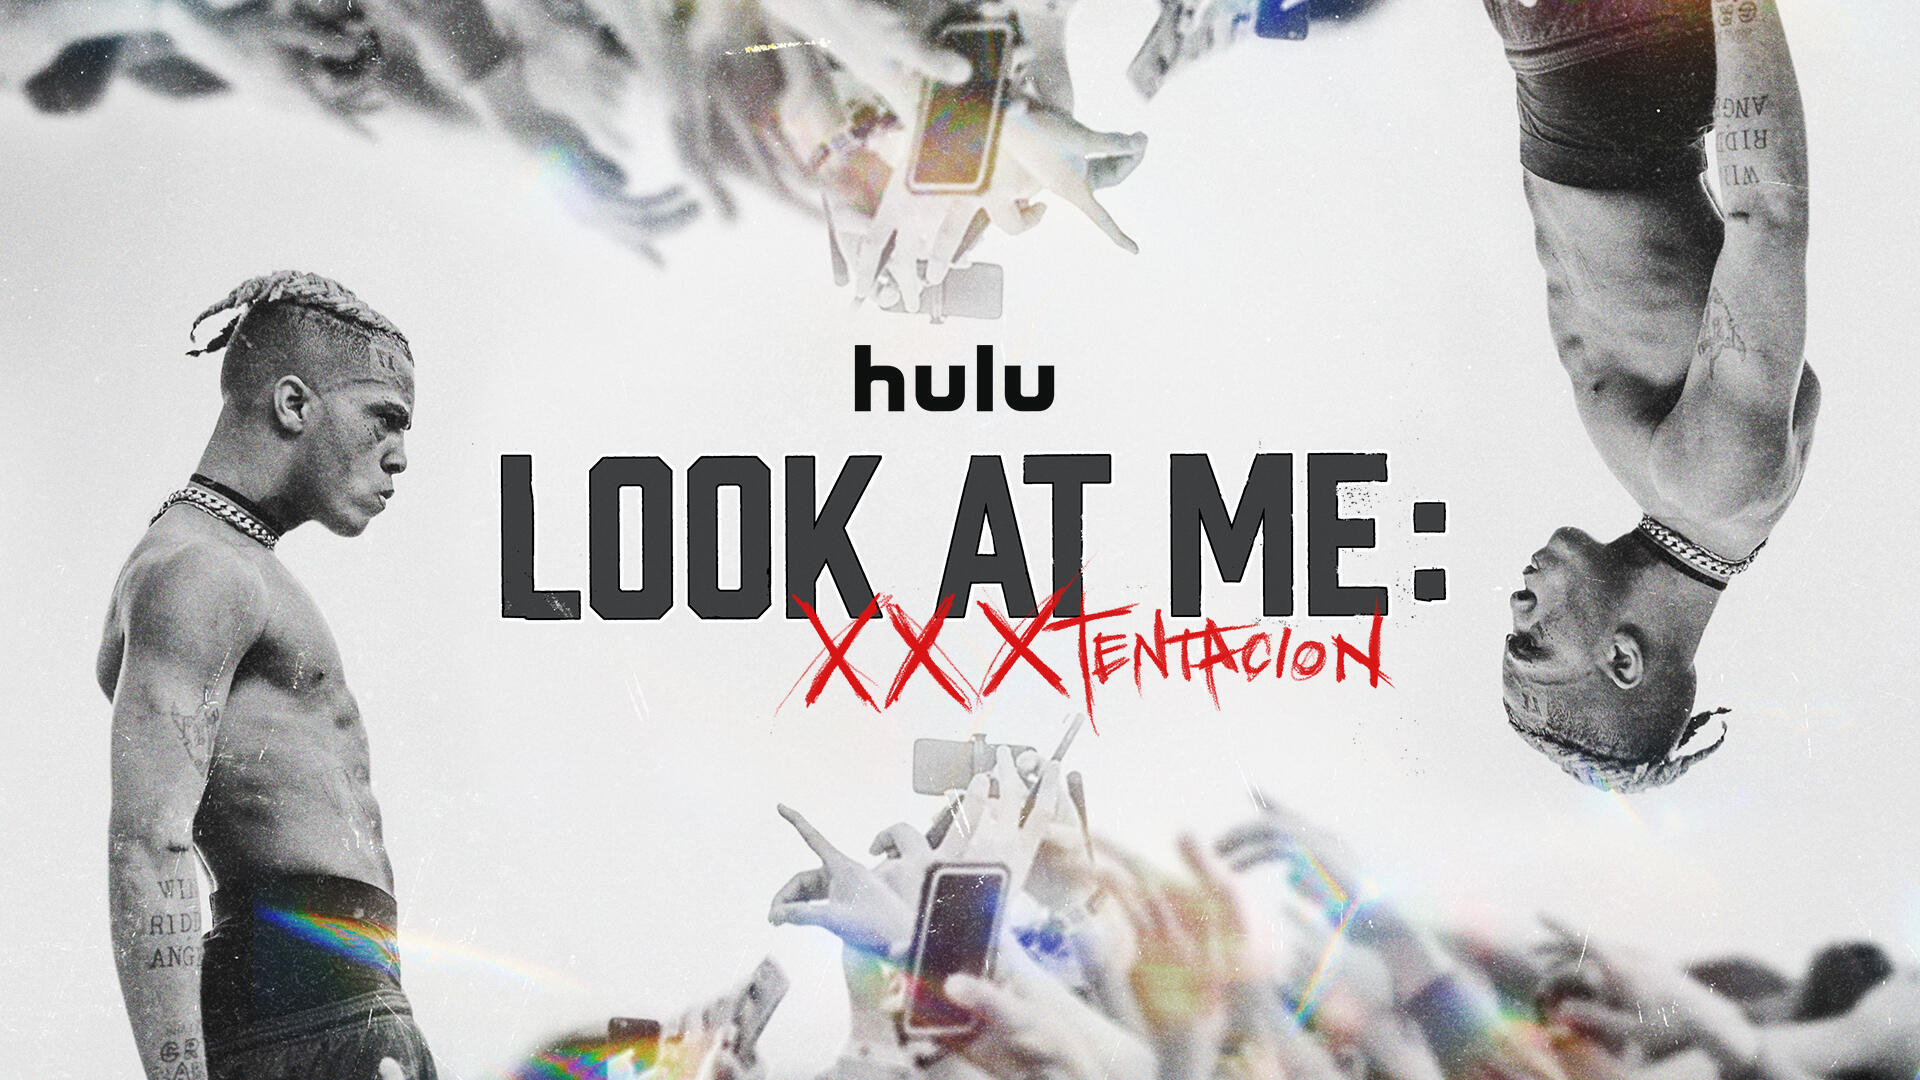 Look at Me: XXXTentacion -- Look At Me: XXXTENTACION explores how Florida teenager Jahseh Onfroy became SoundCloud rapper XXXTENTACION, one of the most streamed artists on the planet. Through frank commentary from family, friends and romantic partners, and unseen archival footage, director Sabaah Folayan offers a sensitive portrayal of an artist whose acts of violence, raw musical talent and open struggles with mental health left an indelible mark on his generation before his death at the age of 20. XXXTentacion (Jahseh Onfroy), shown. (Courtesy of Hulu)